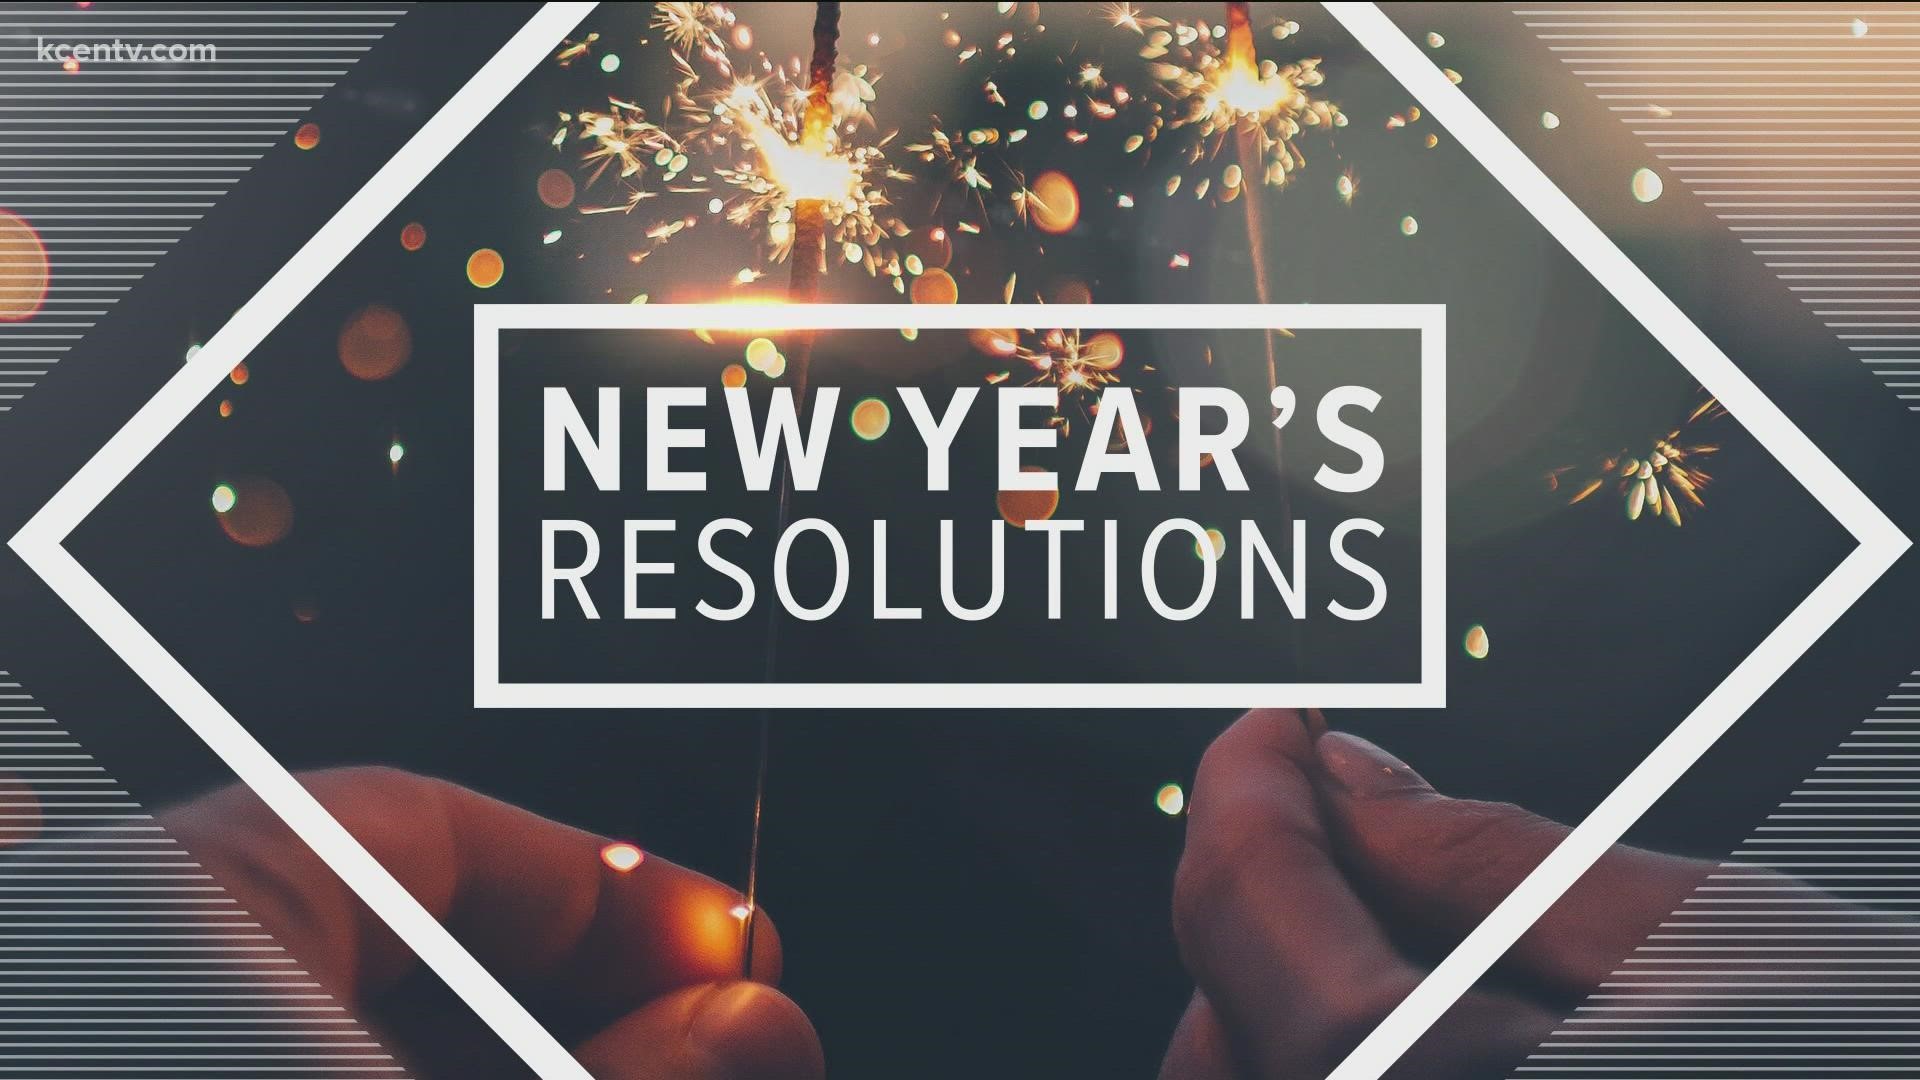 The biggest issue with resolutions is the pressure we put on ourselves to do something great.